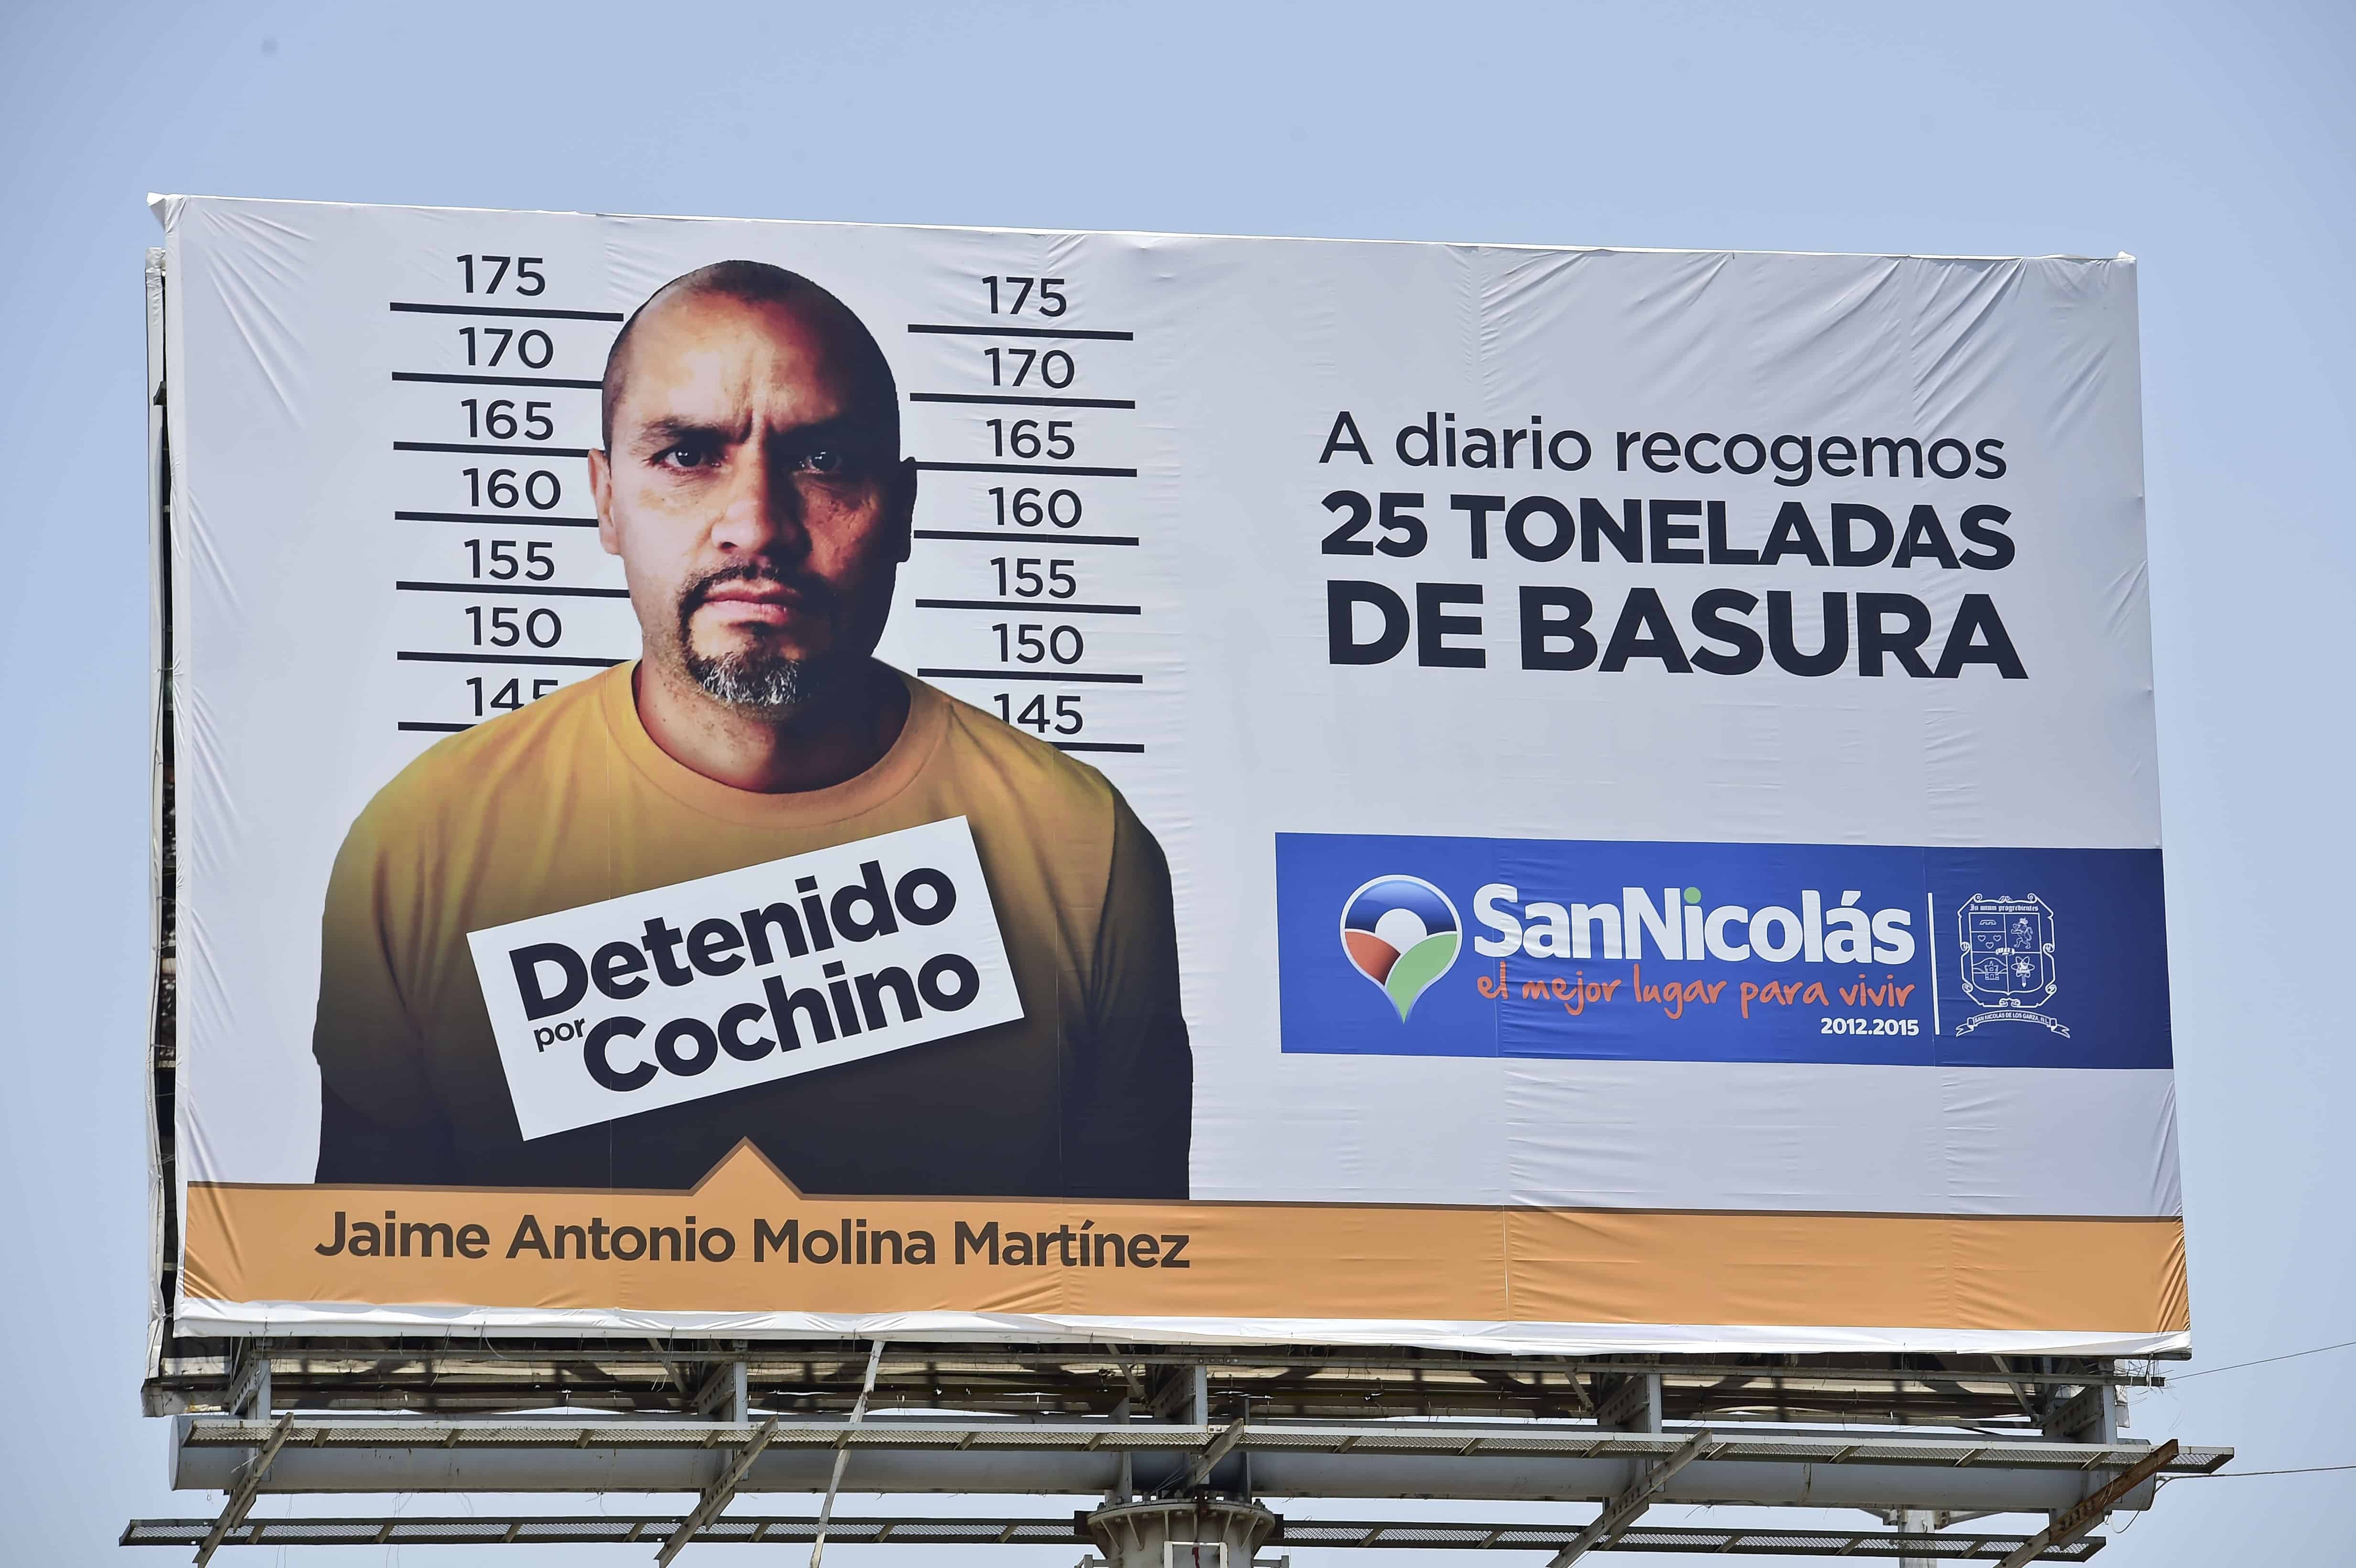 A billboard shows the mugshot of a man arrested for littering in Monterrey.